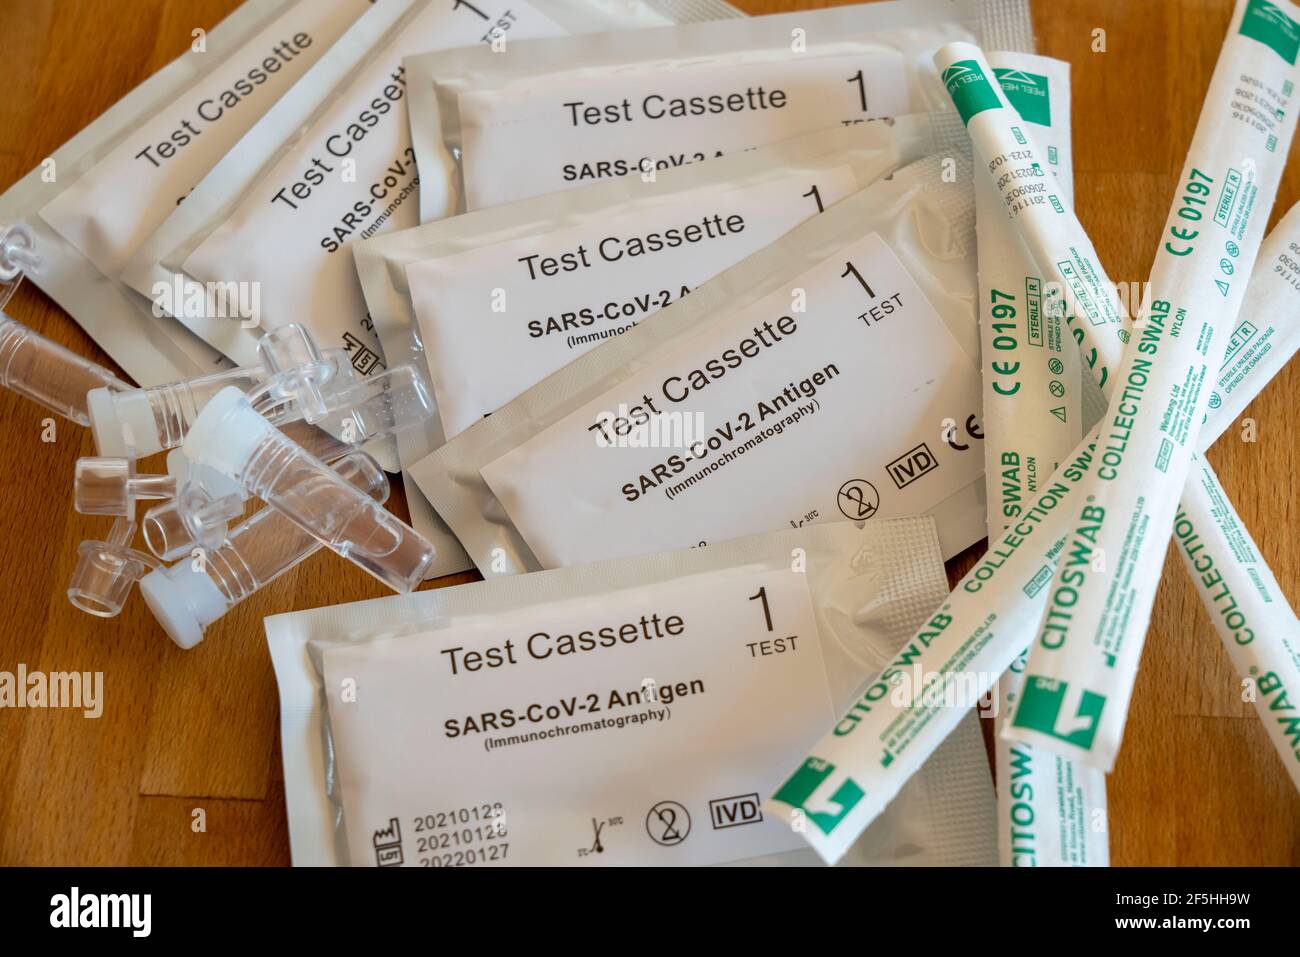 Corona Antigen Rapid Test, lay test, self-test, for the detection of SARS-CoV-2 infection, Stock Photo